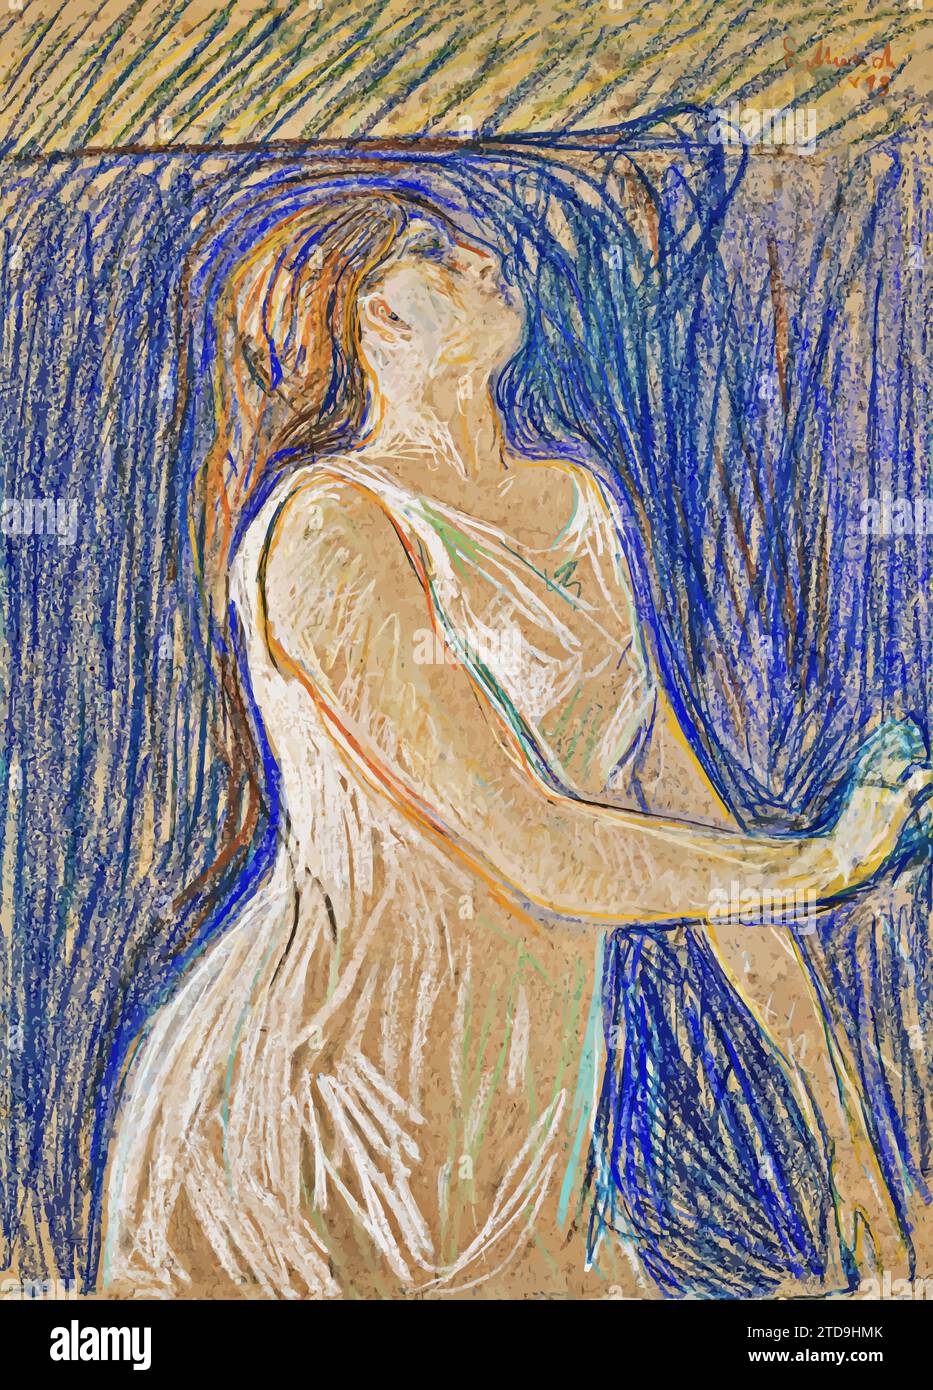 Study of a Model, 1893 (Painting) dell'artista Munch, Edvard (1863-1944) / norvegese. Illustrazione Vettoriale